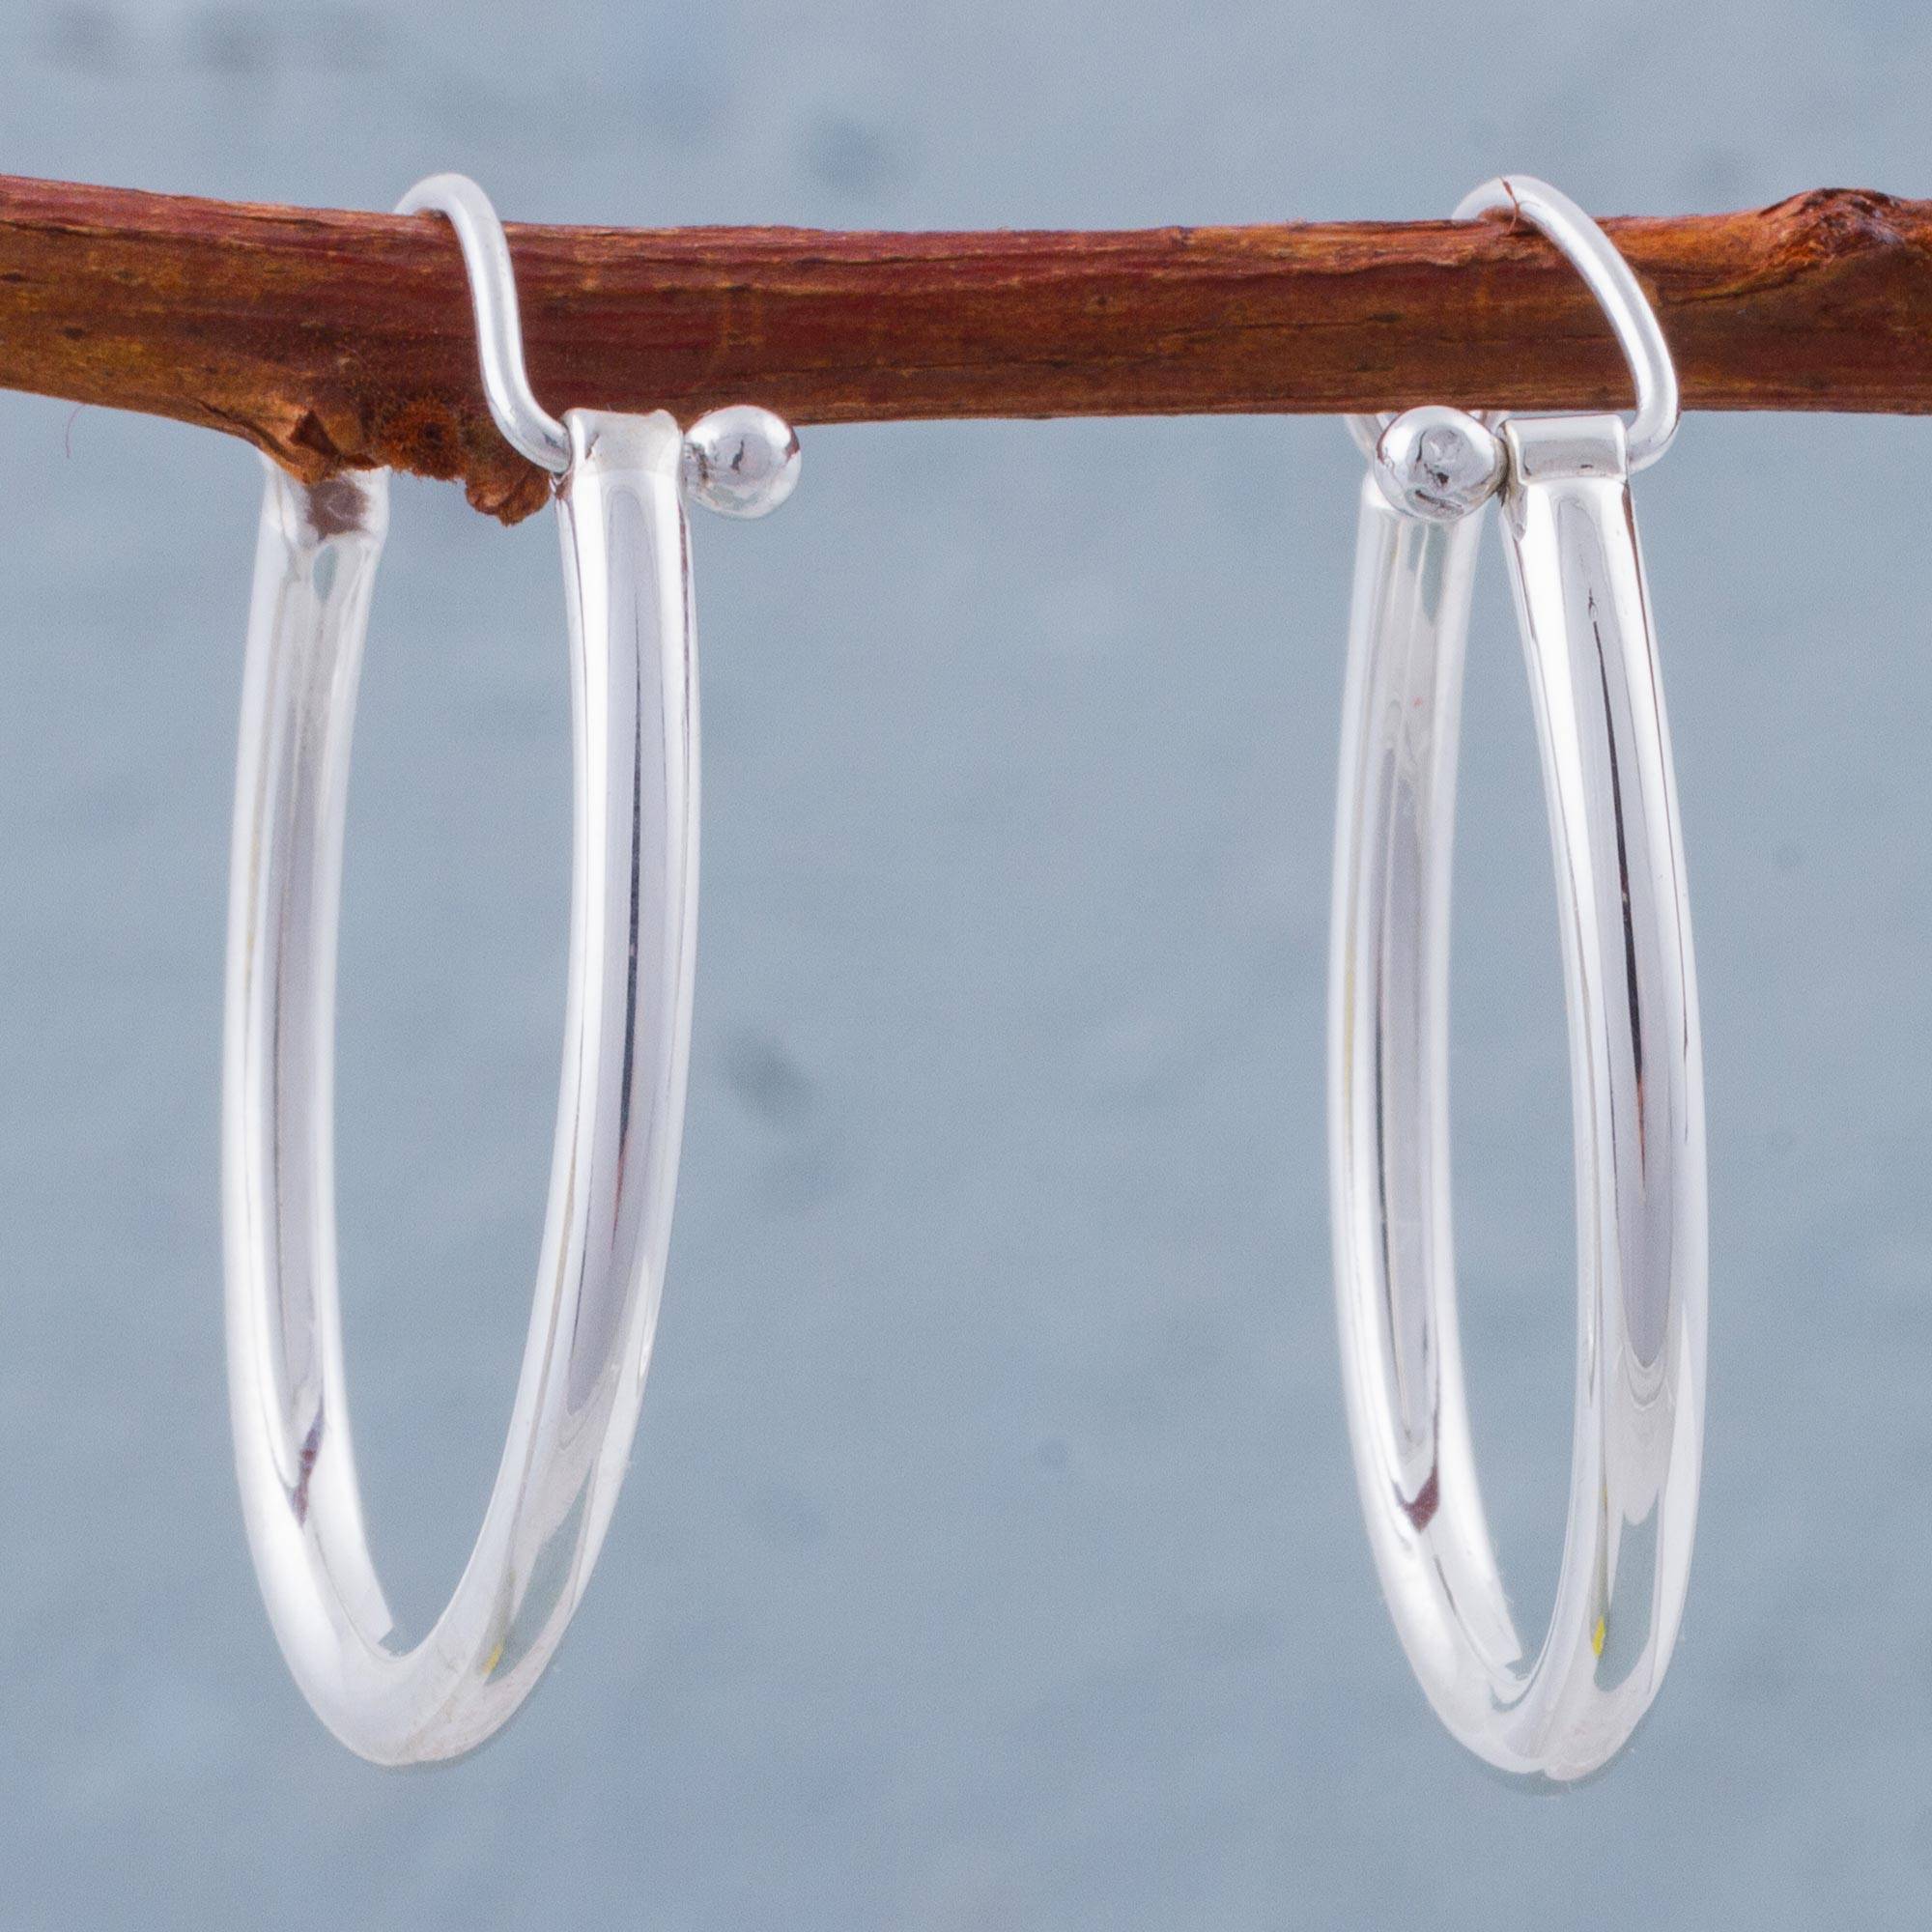 Earrings Guide 'Life Circles' Oval Hoop Earrings Hand Crafted in 925 Sterling Silver